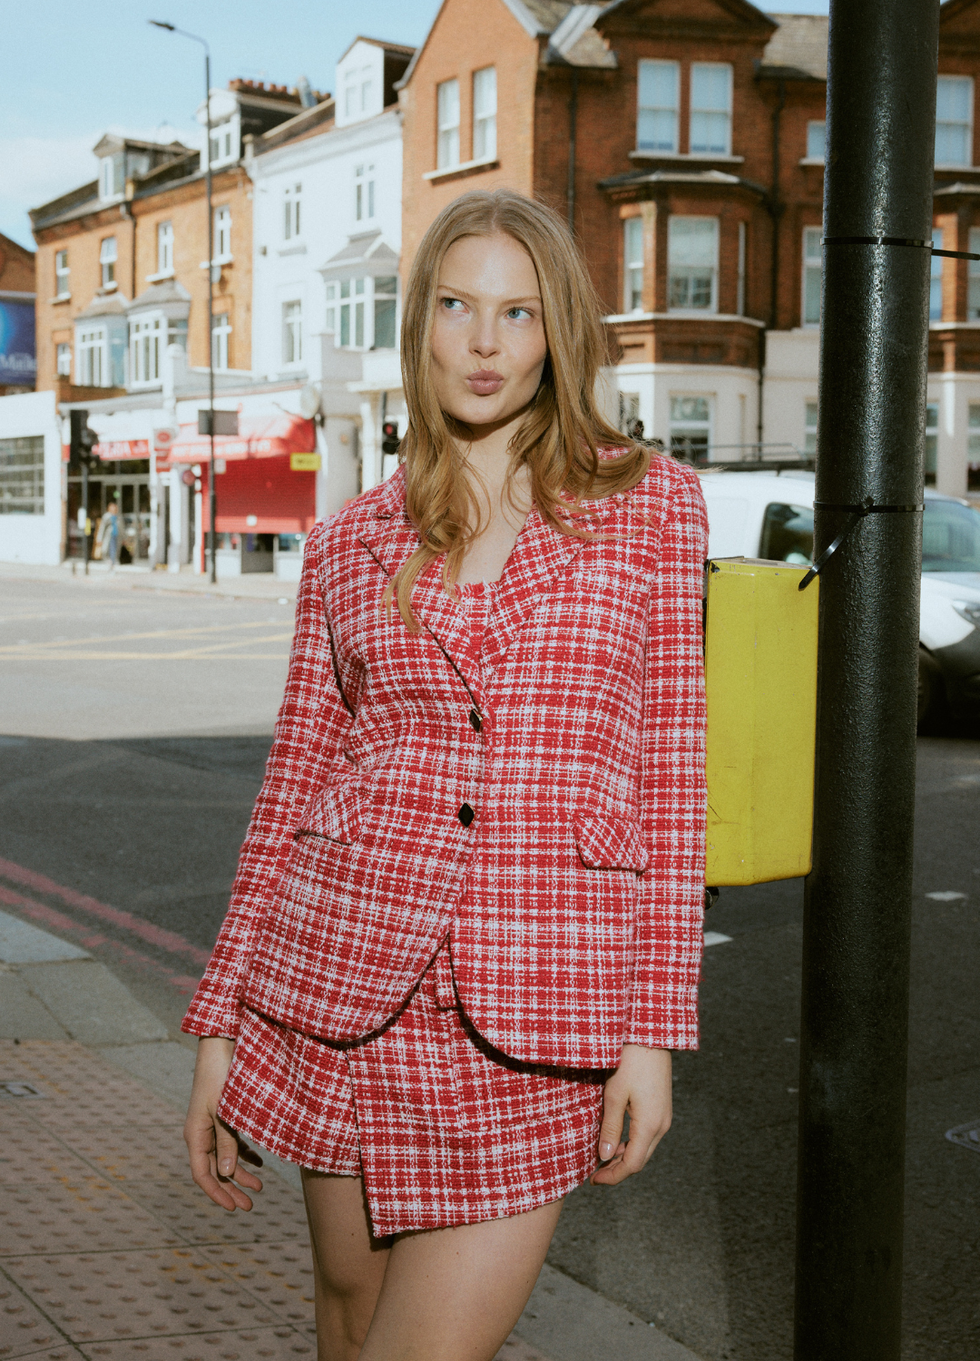 hurr rental flex launch featuring a woman wearing a red and white checkered suit jacket and skirt